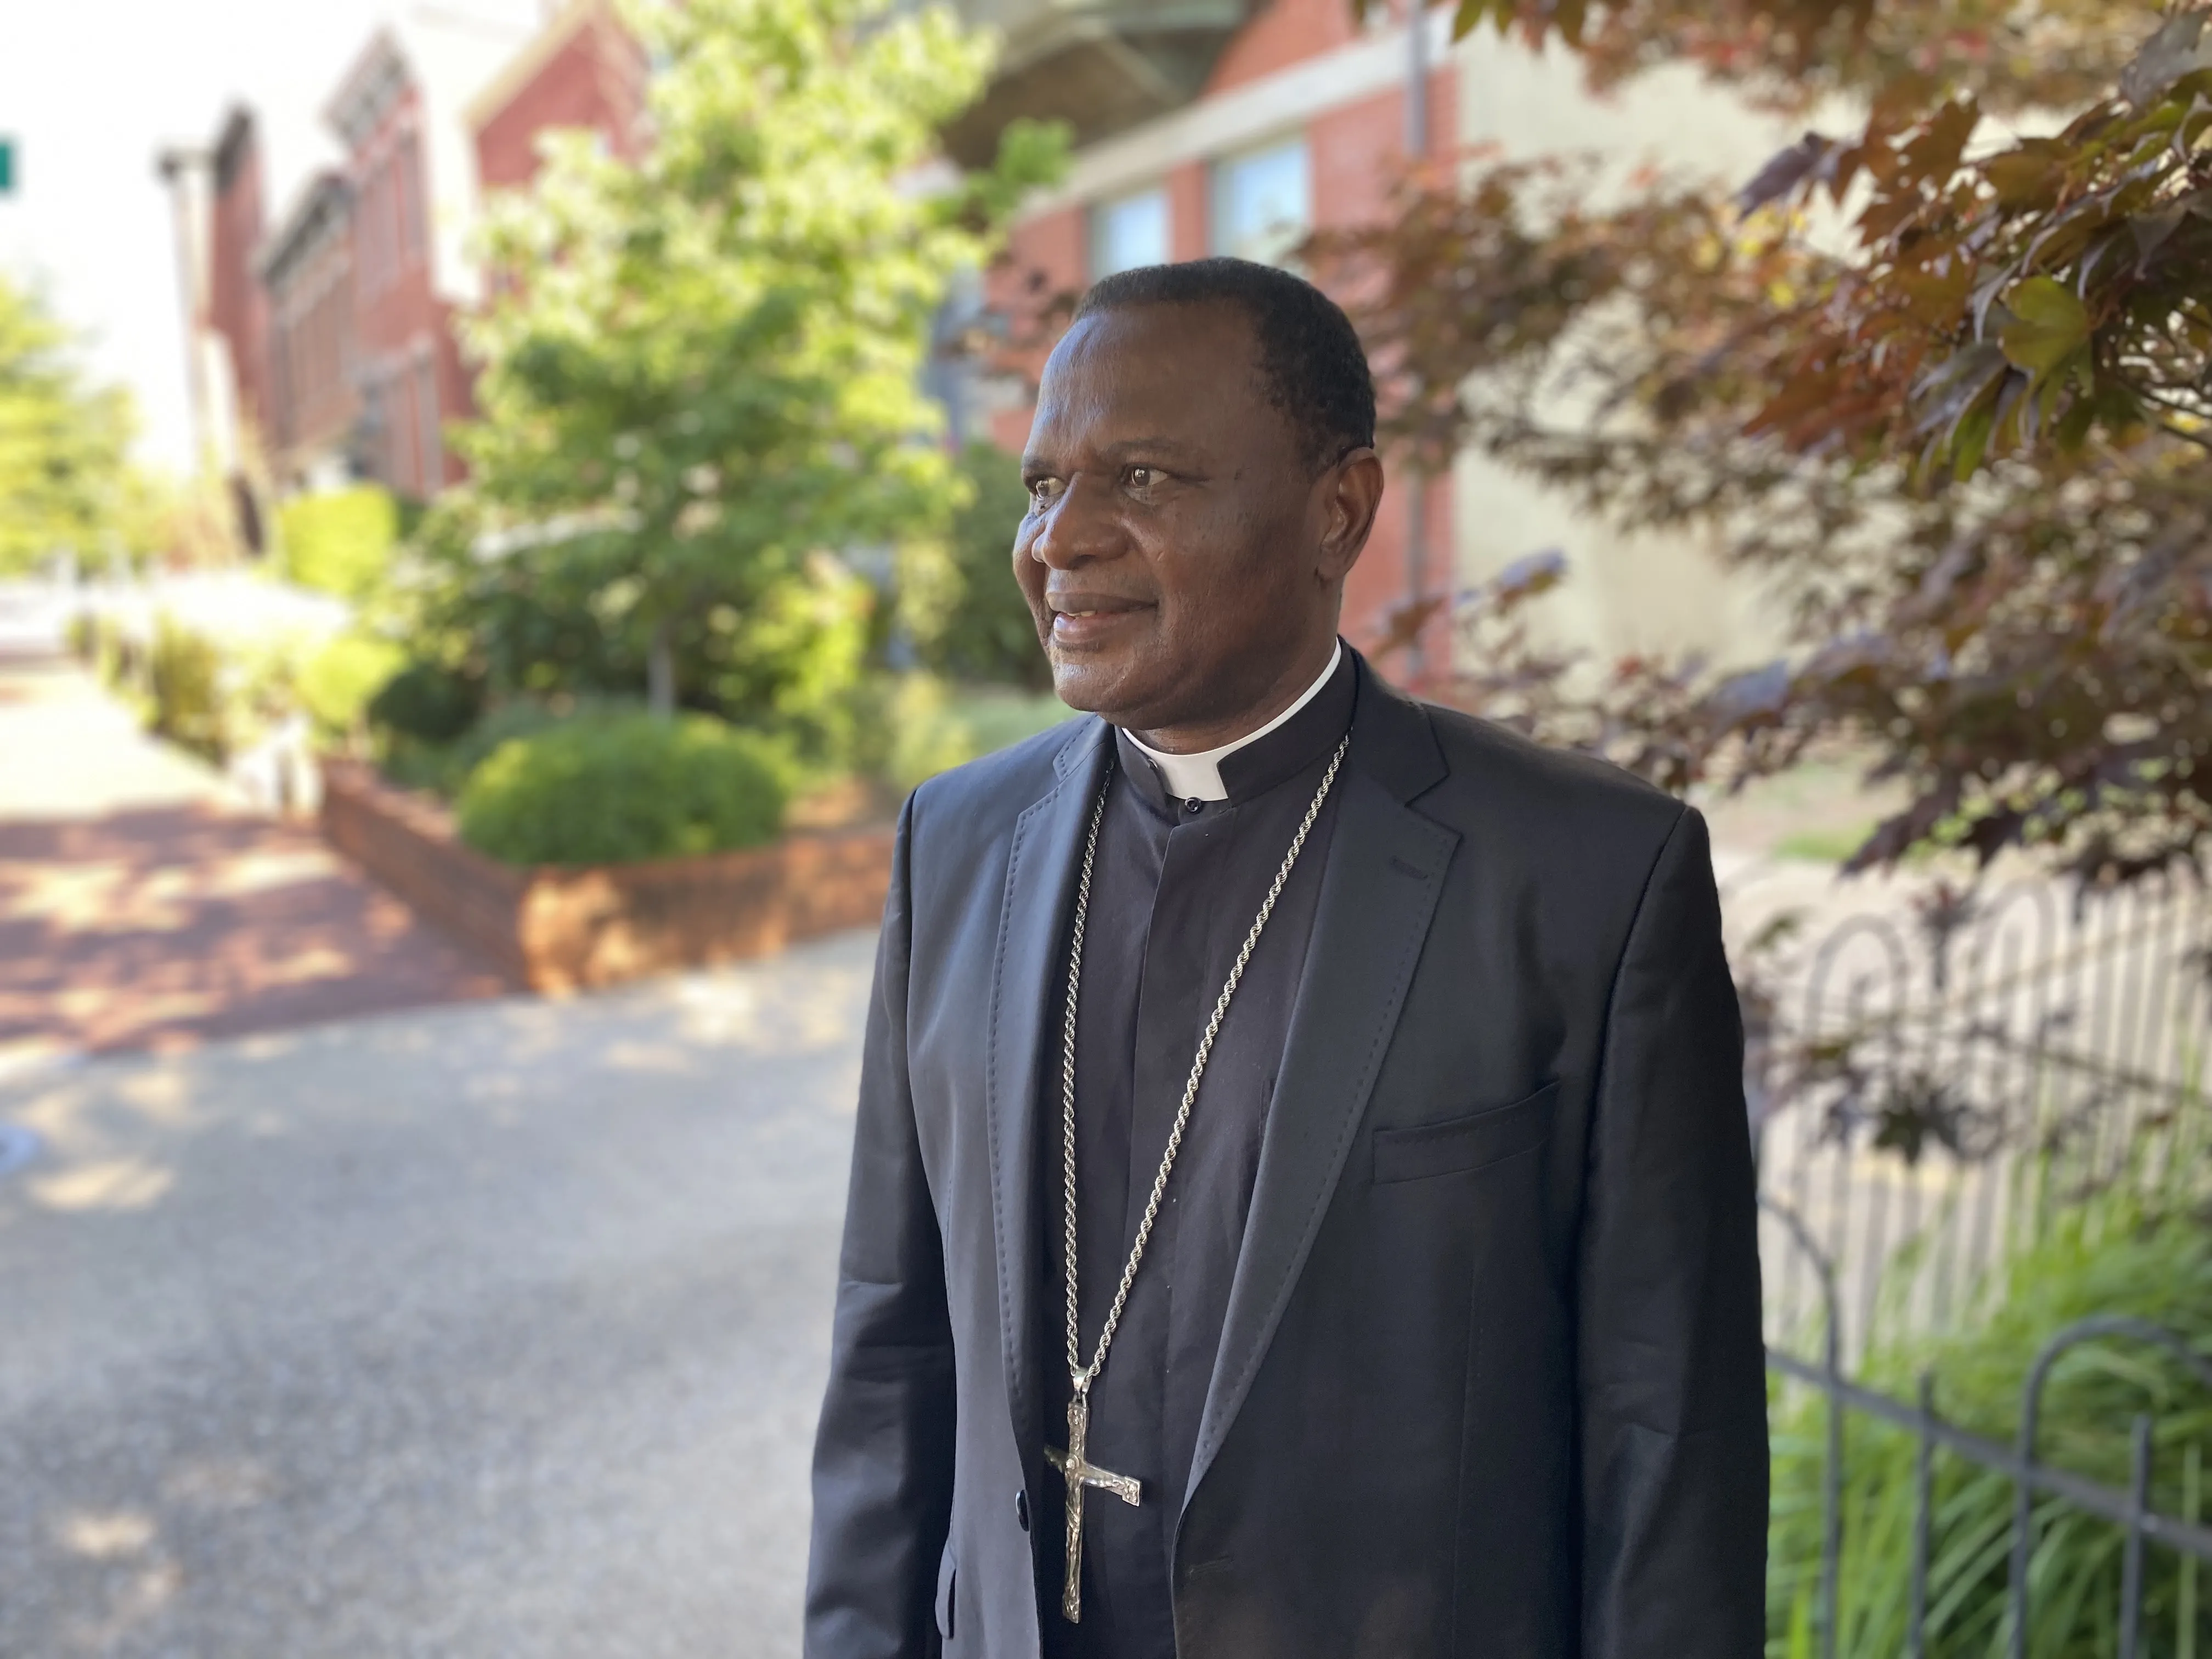 Bishop Jude Arogundade in Washington, D.C., on June 30, 2022 outside the Belmont House, where he attended a breakfast social with U.S. congressmen and religious freedom advocates.?w=200&h=150